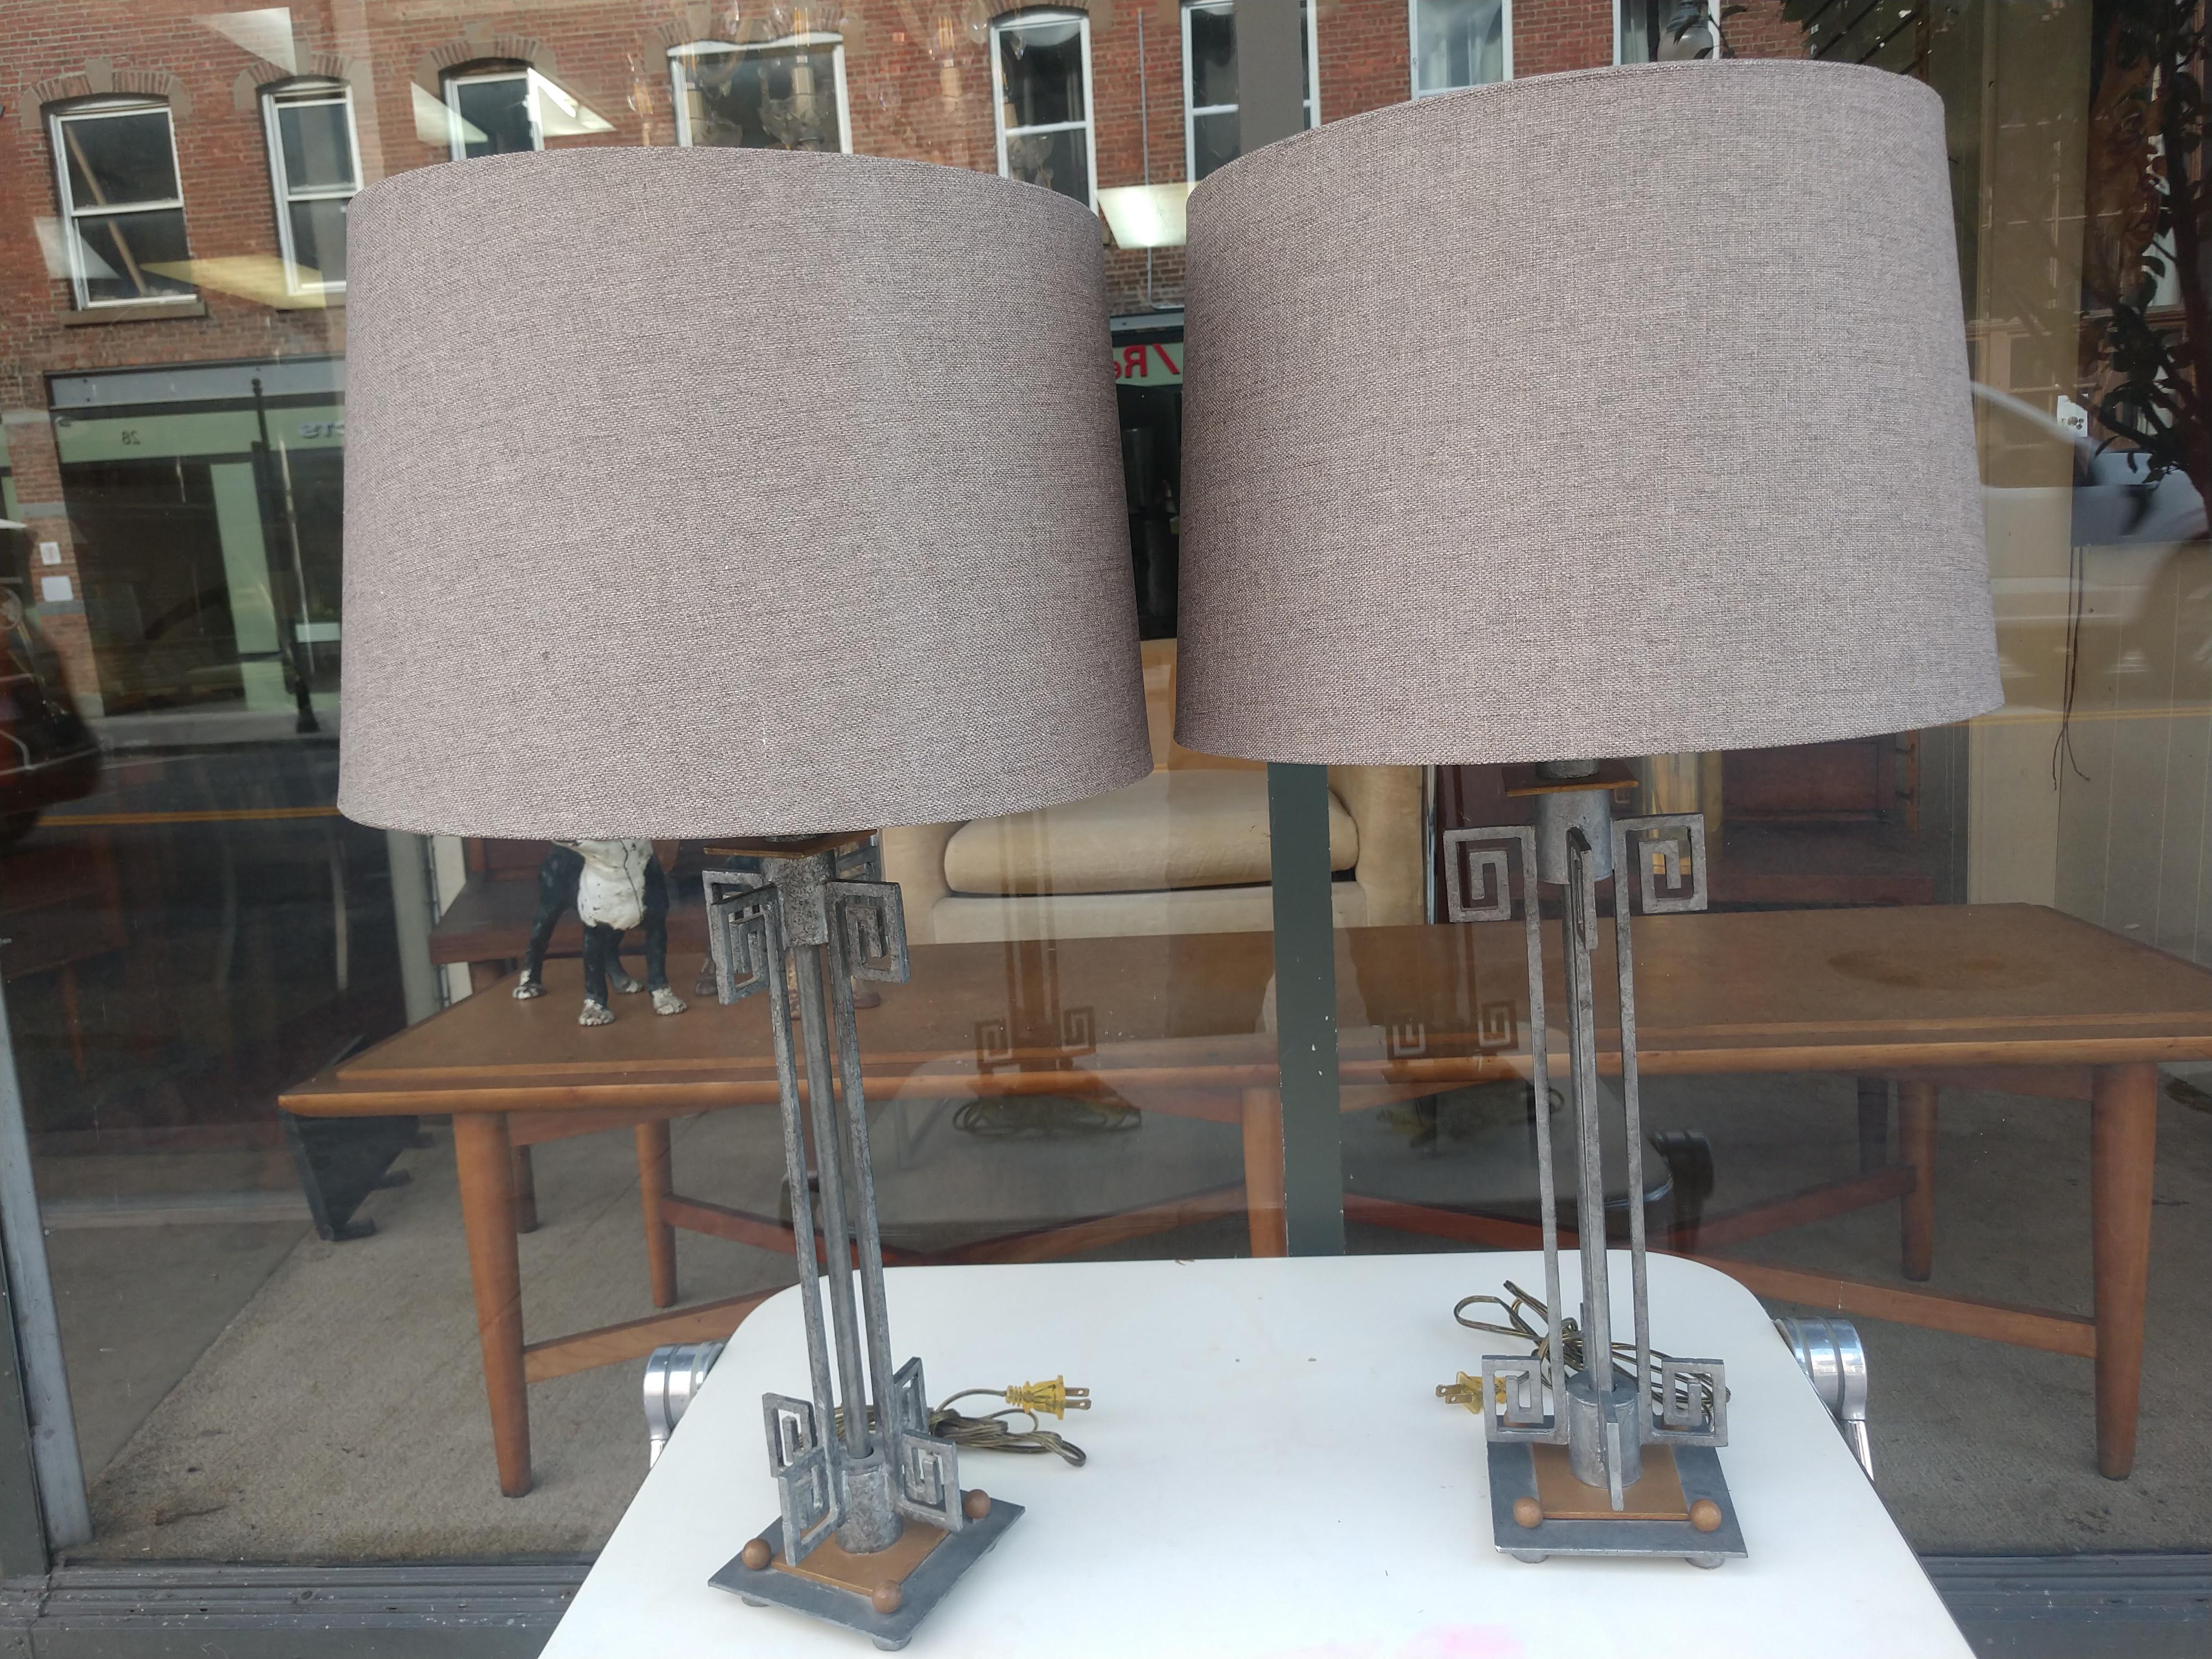 Welded Mid-Century Modern Pair of Table Lamps with Mixed Metal and Greek Key Design